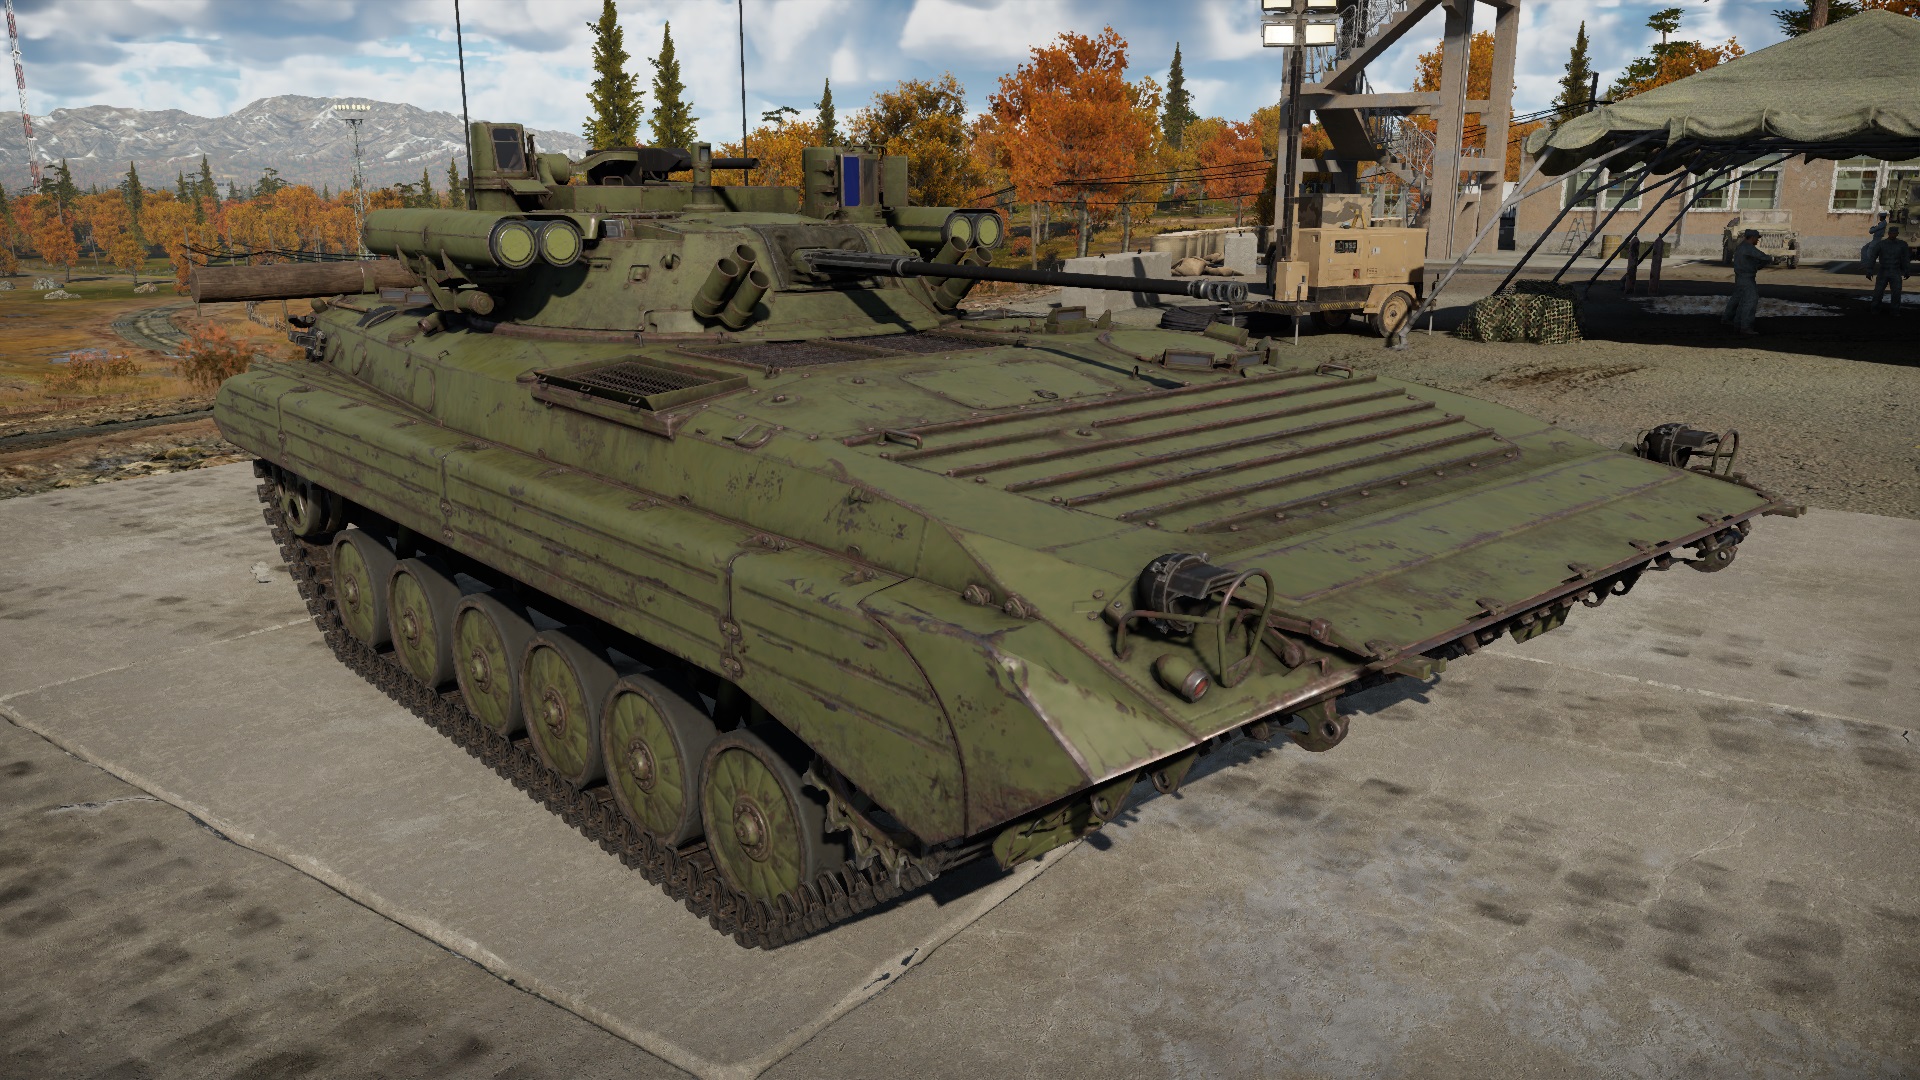 War Thunder - IFVs tiered from best to worst - BMP-2M